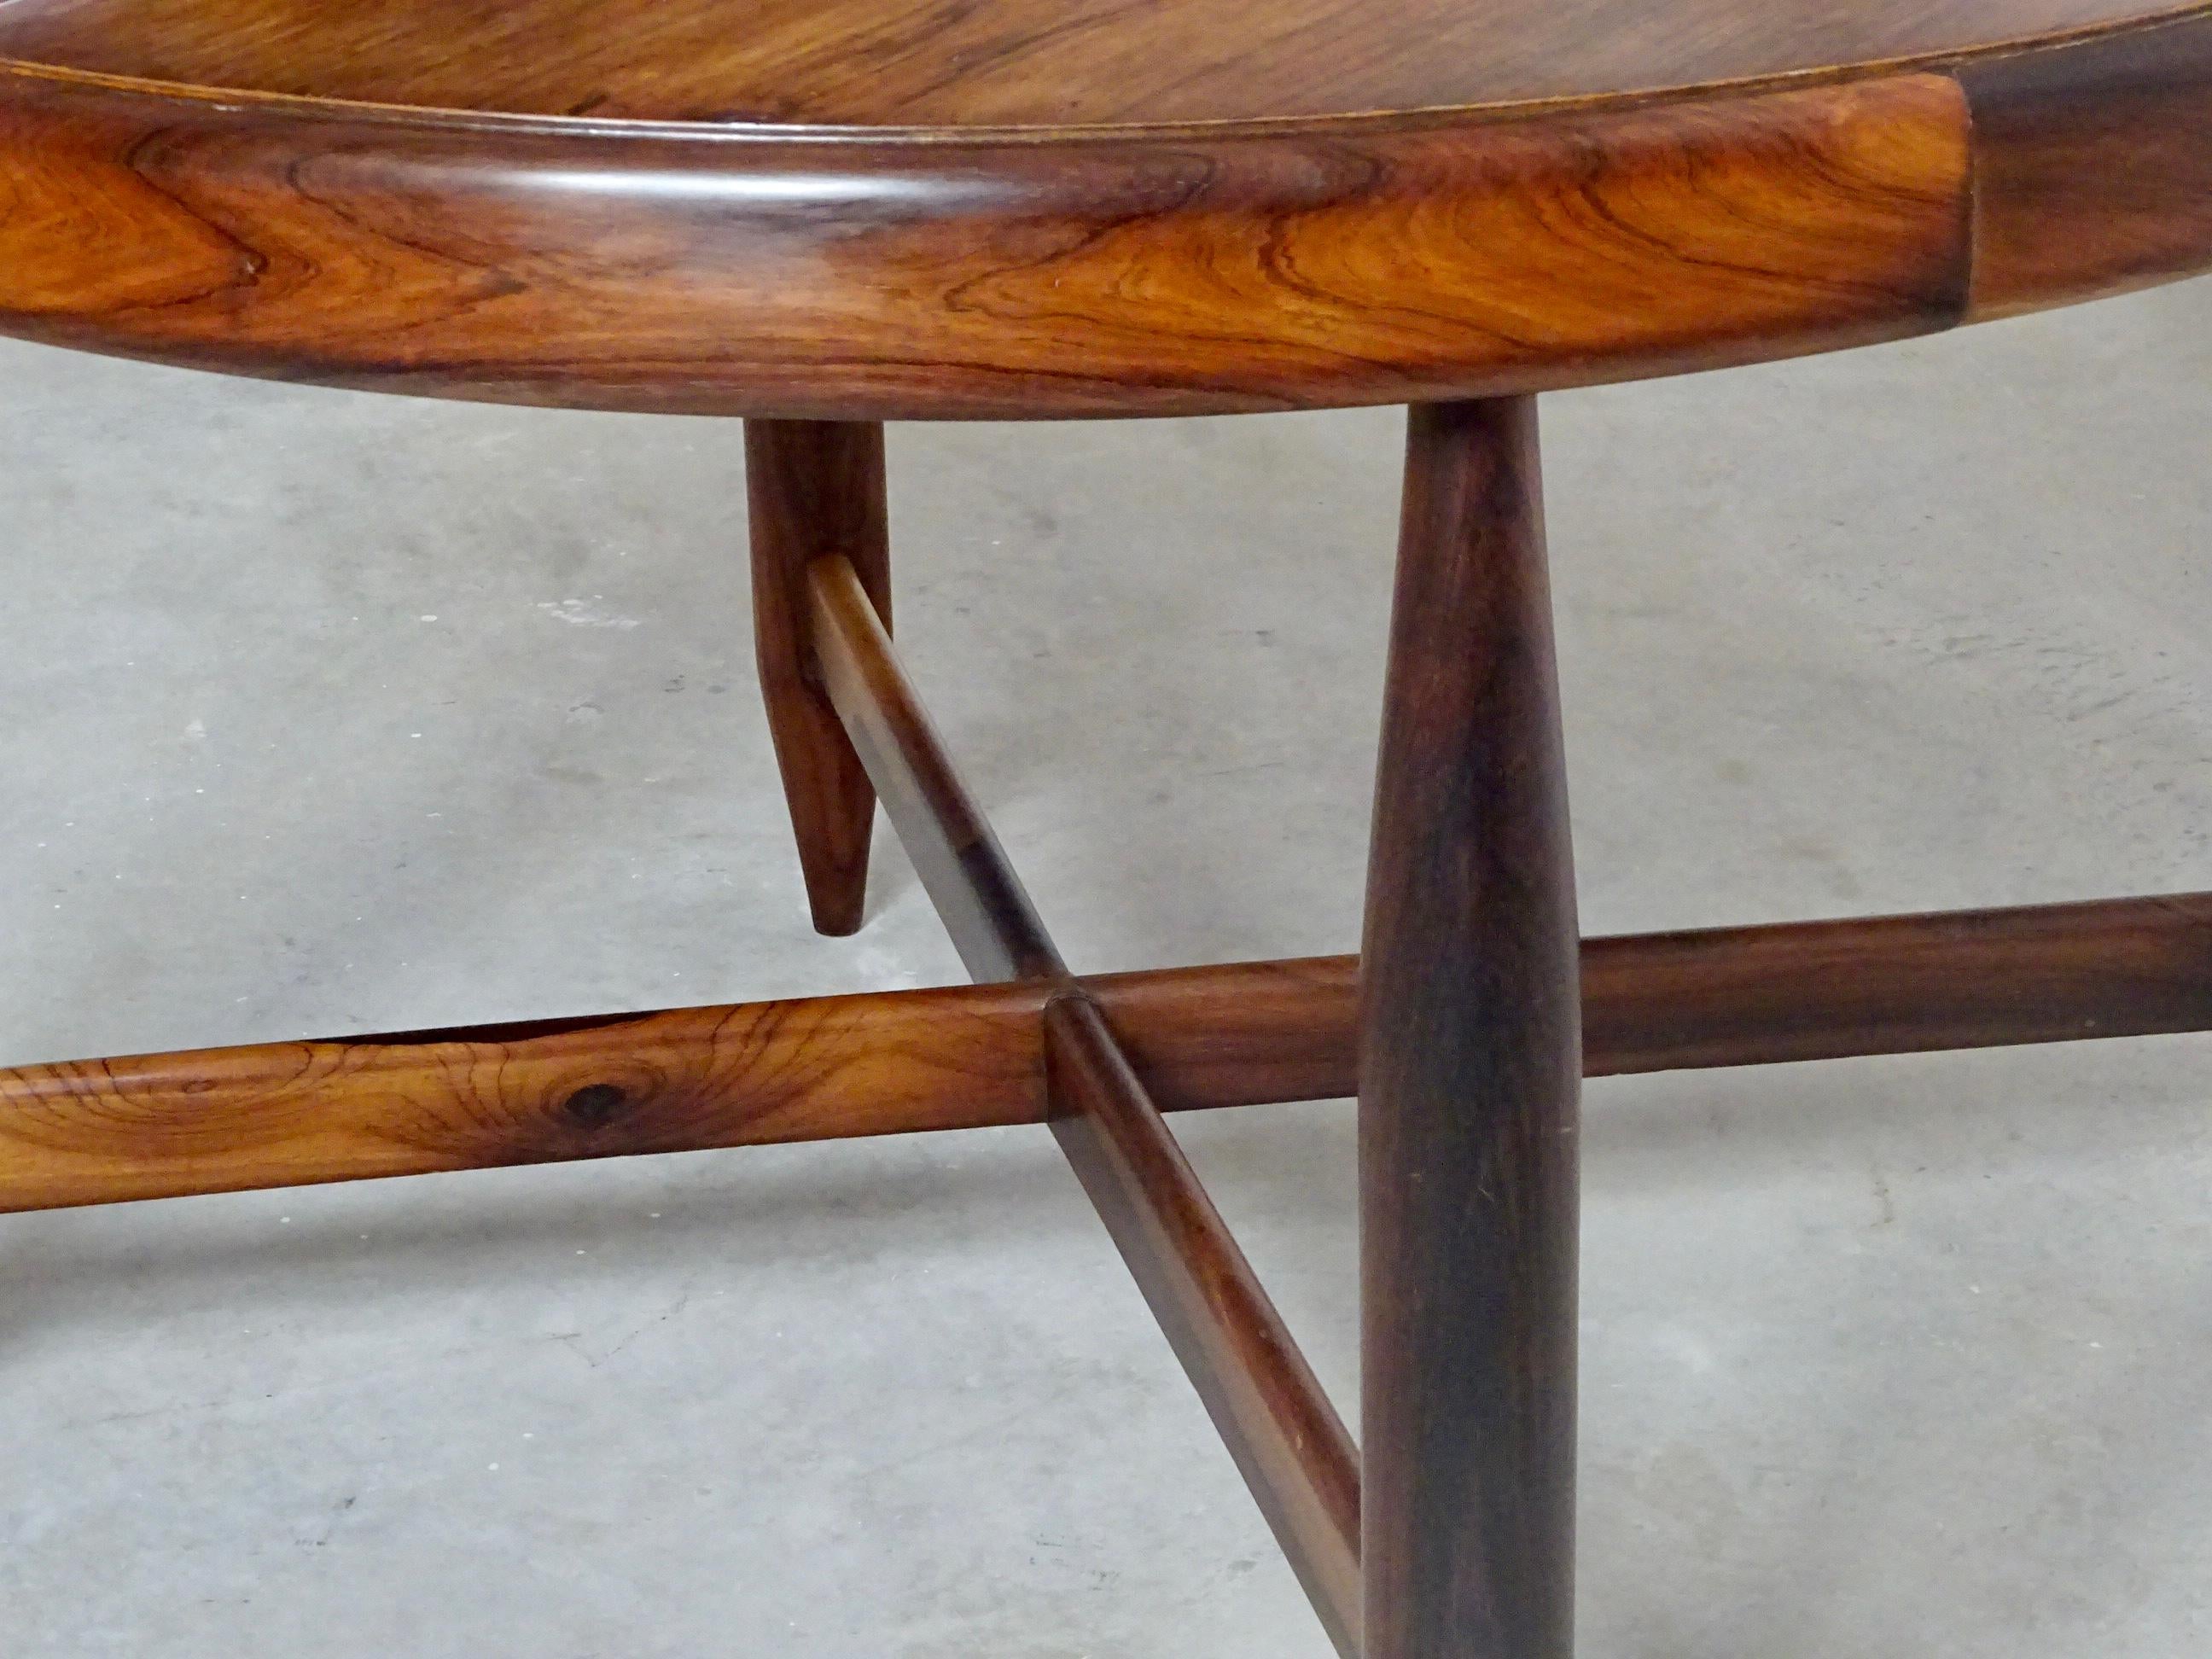 Hardwood Mid-Century Modern Dining Table by Jorge Jabour Mauad, Brazil, 1960s For Sale